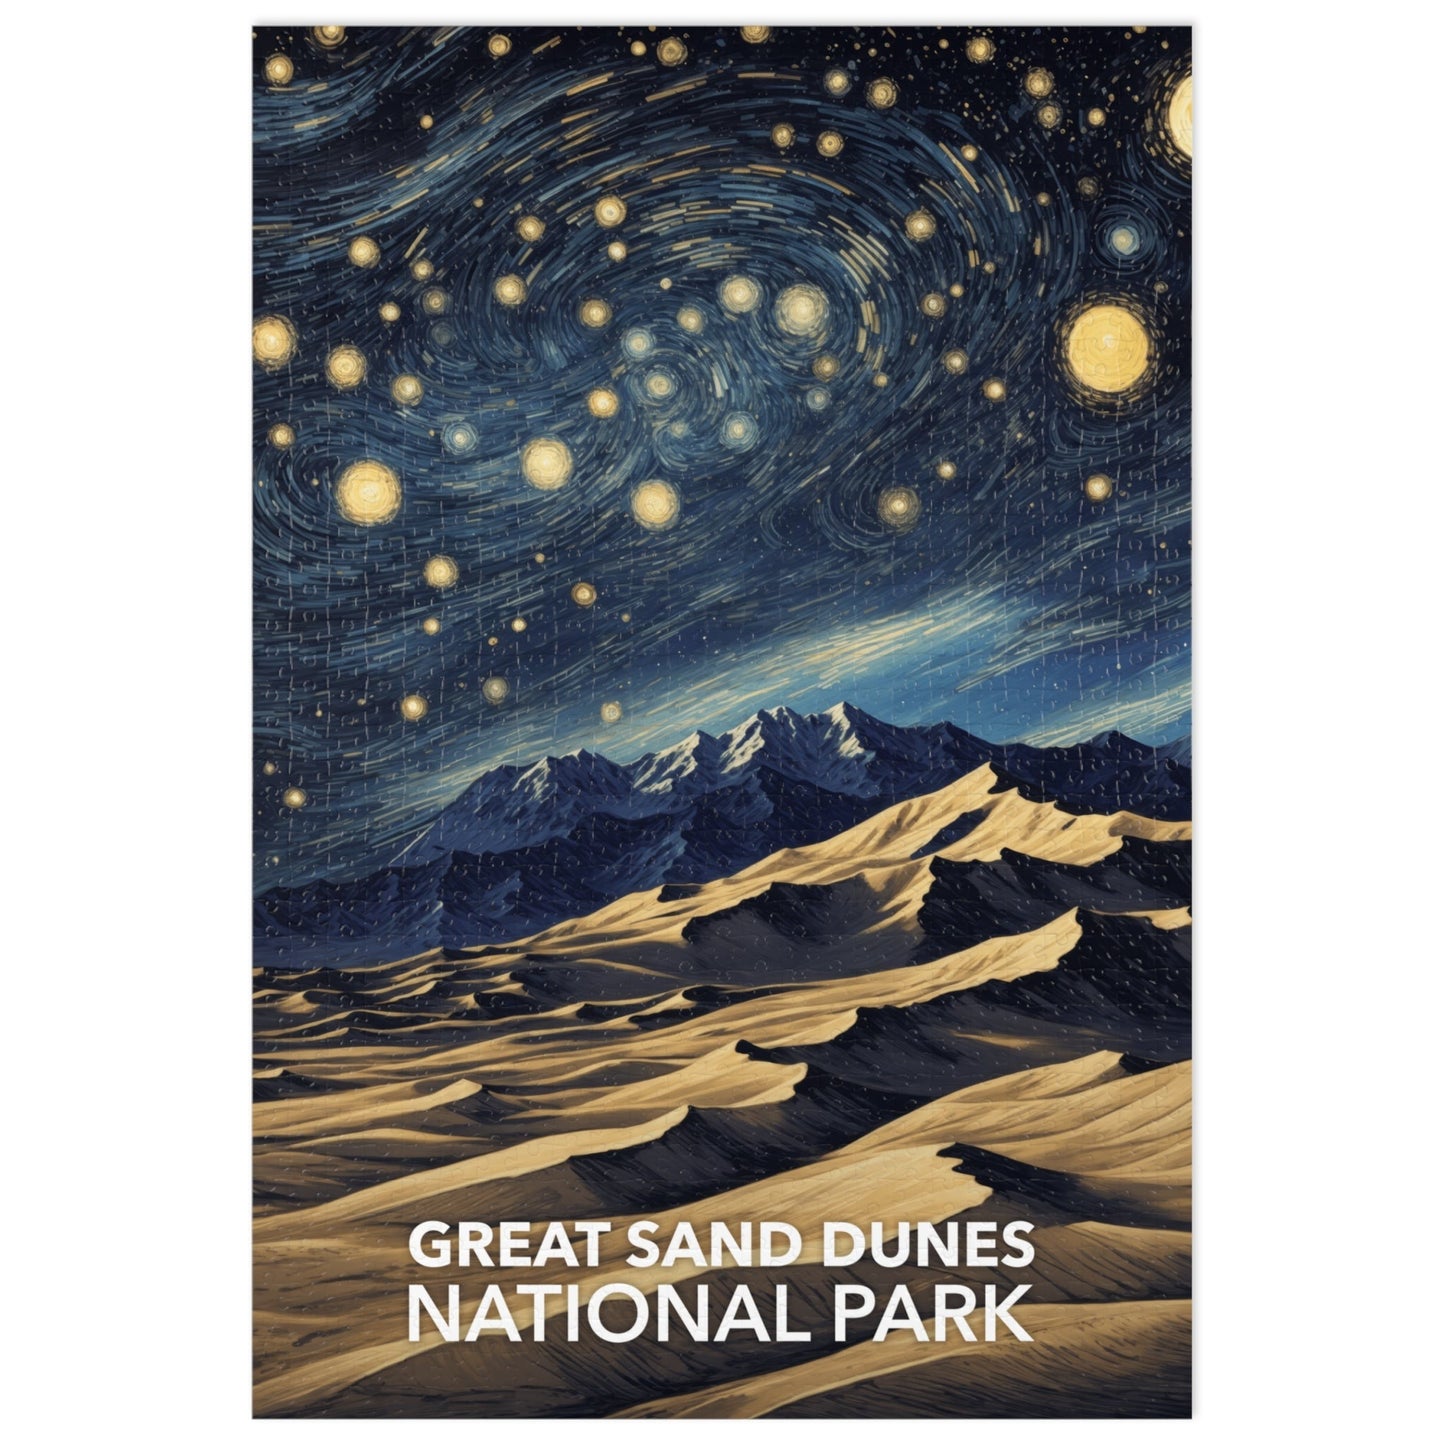 Great Sand Dunes National Park Jigsaw Puzzle